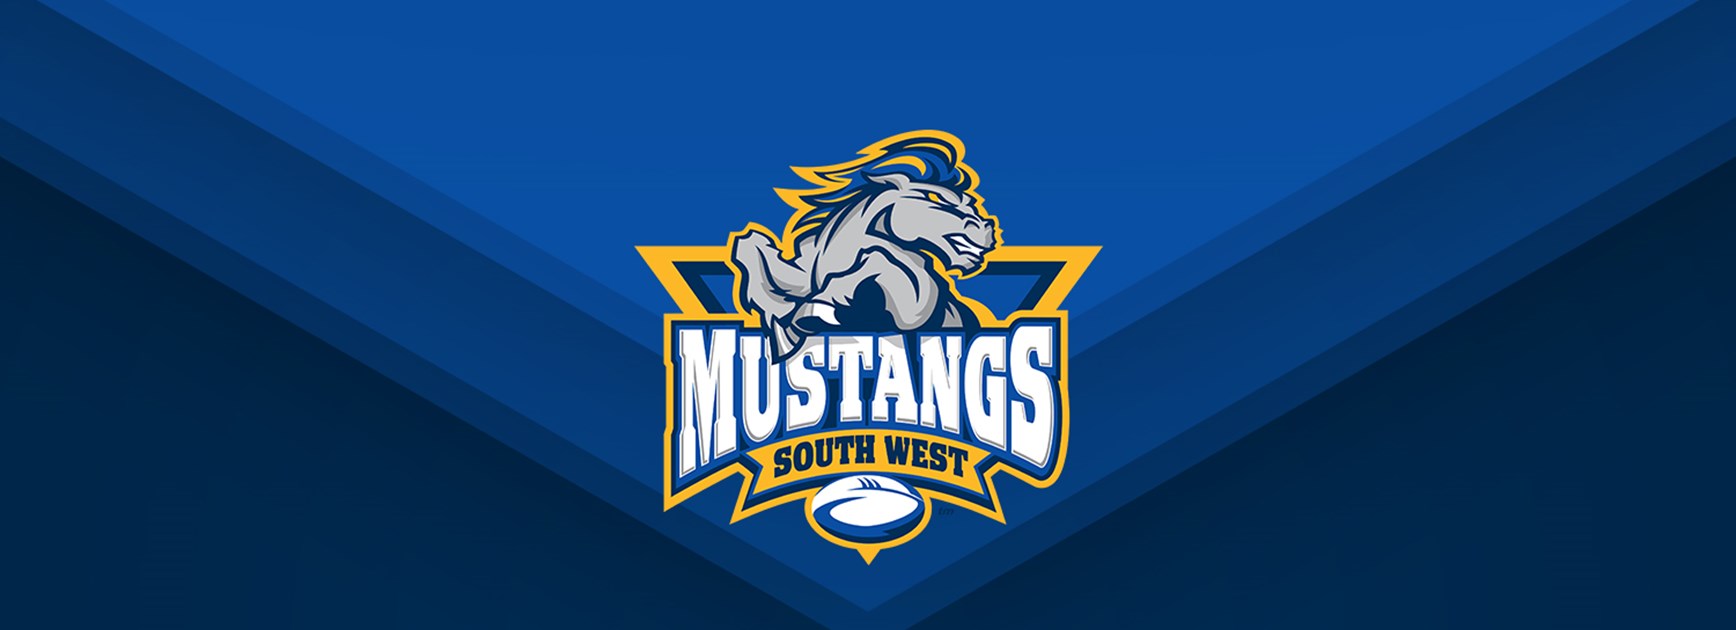 South West Mustangs staff